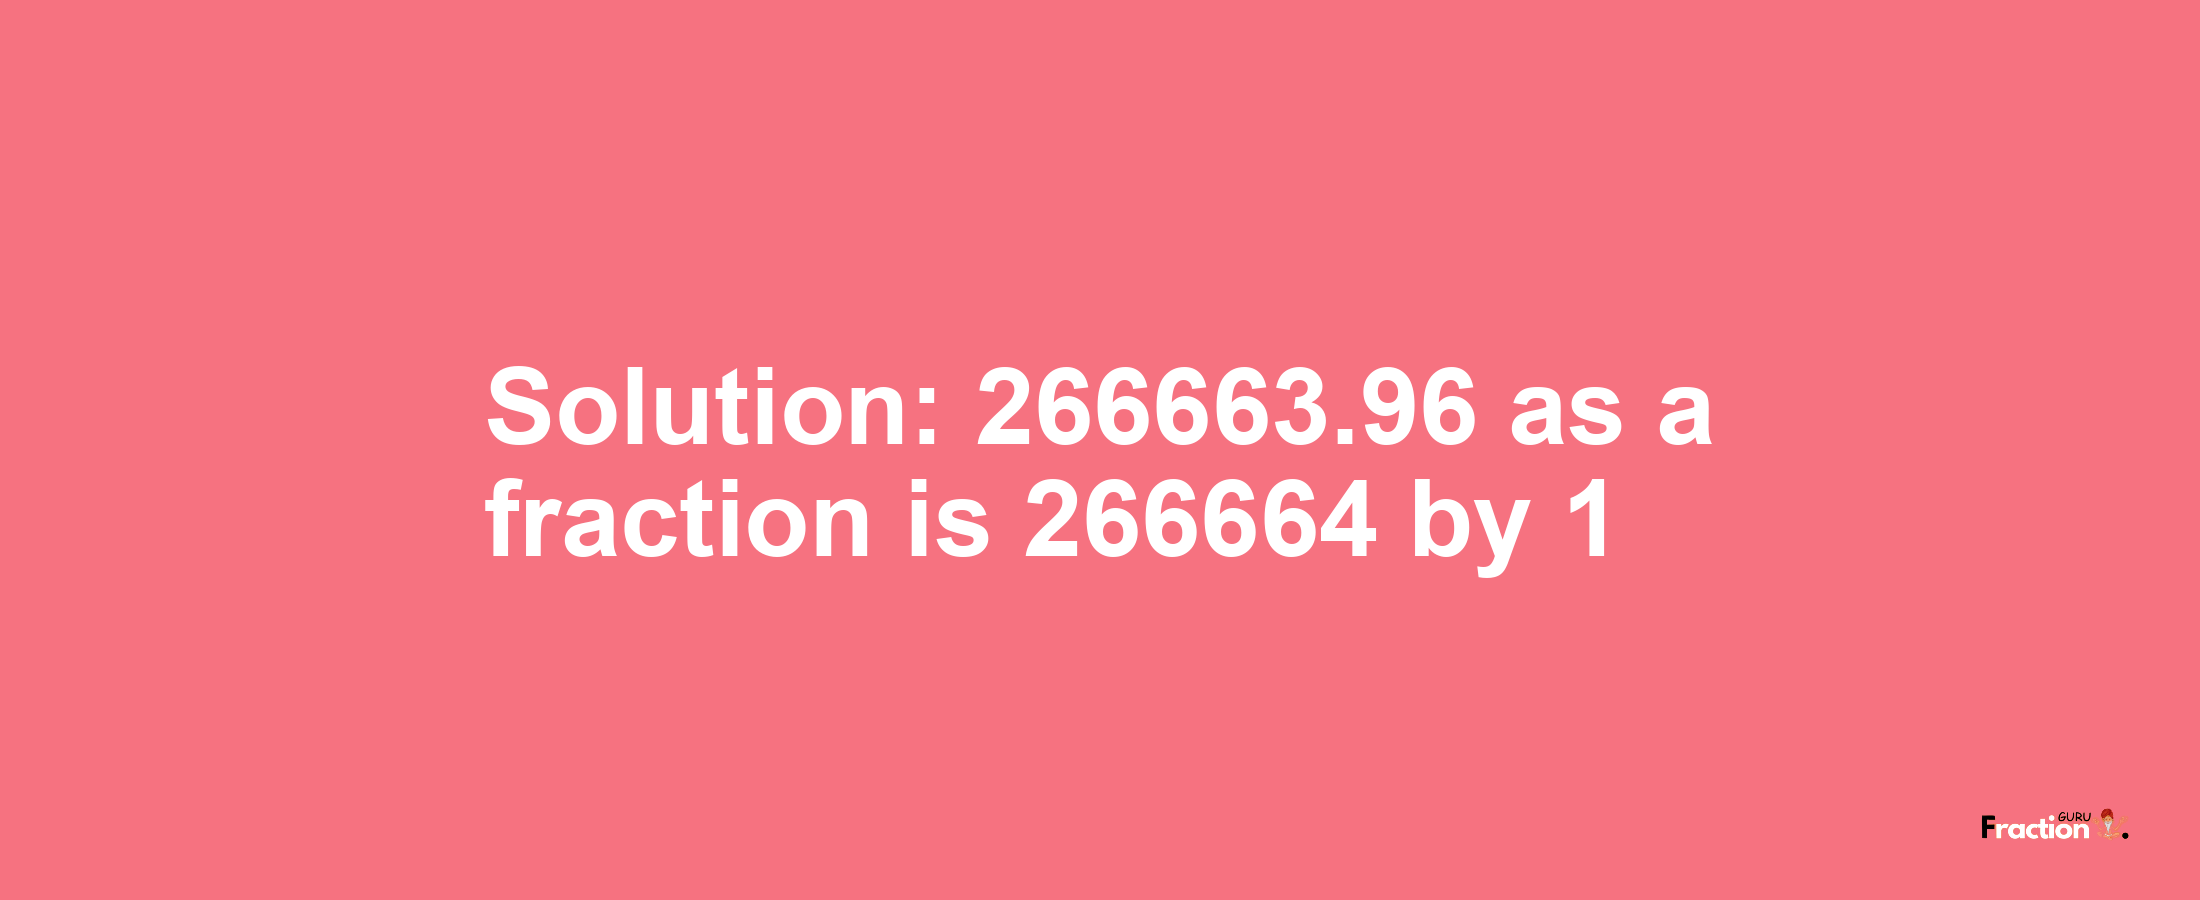 Solution:266663.96 as a fraction is 266664/1